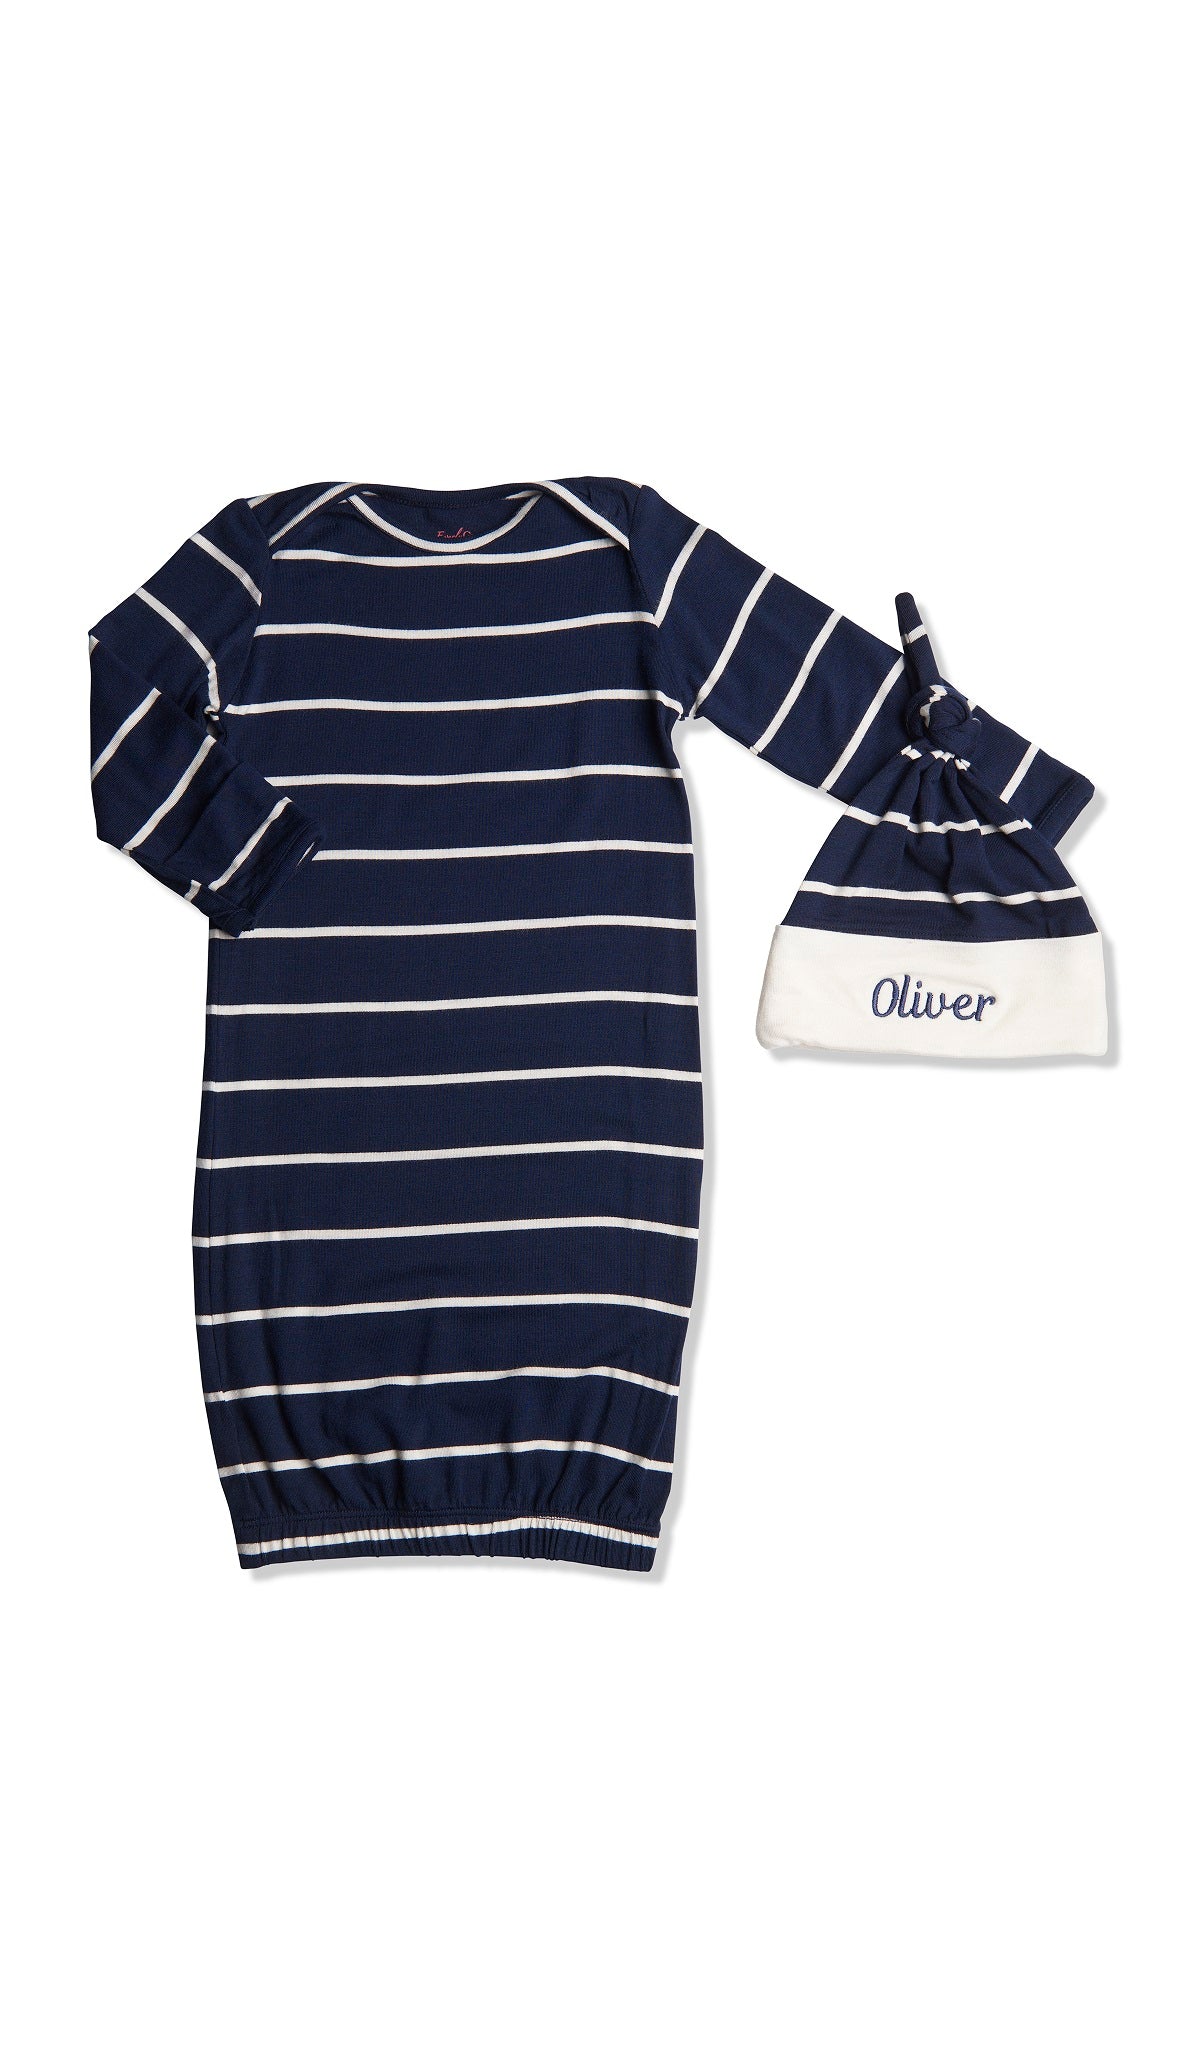 Personalized Gown 2-Piece Navy with name embroidered on knotted baby hat.